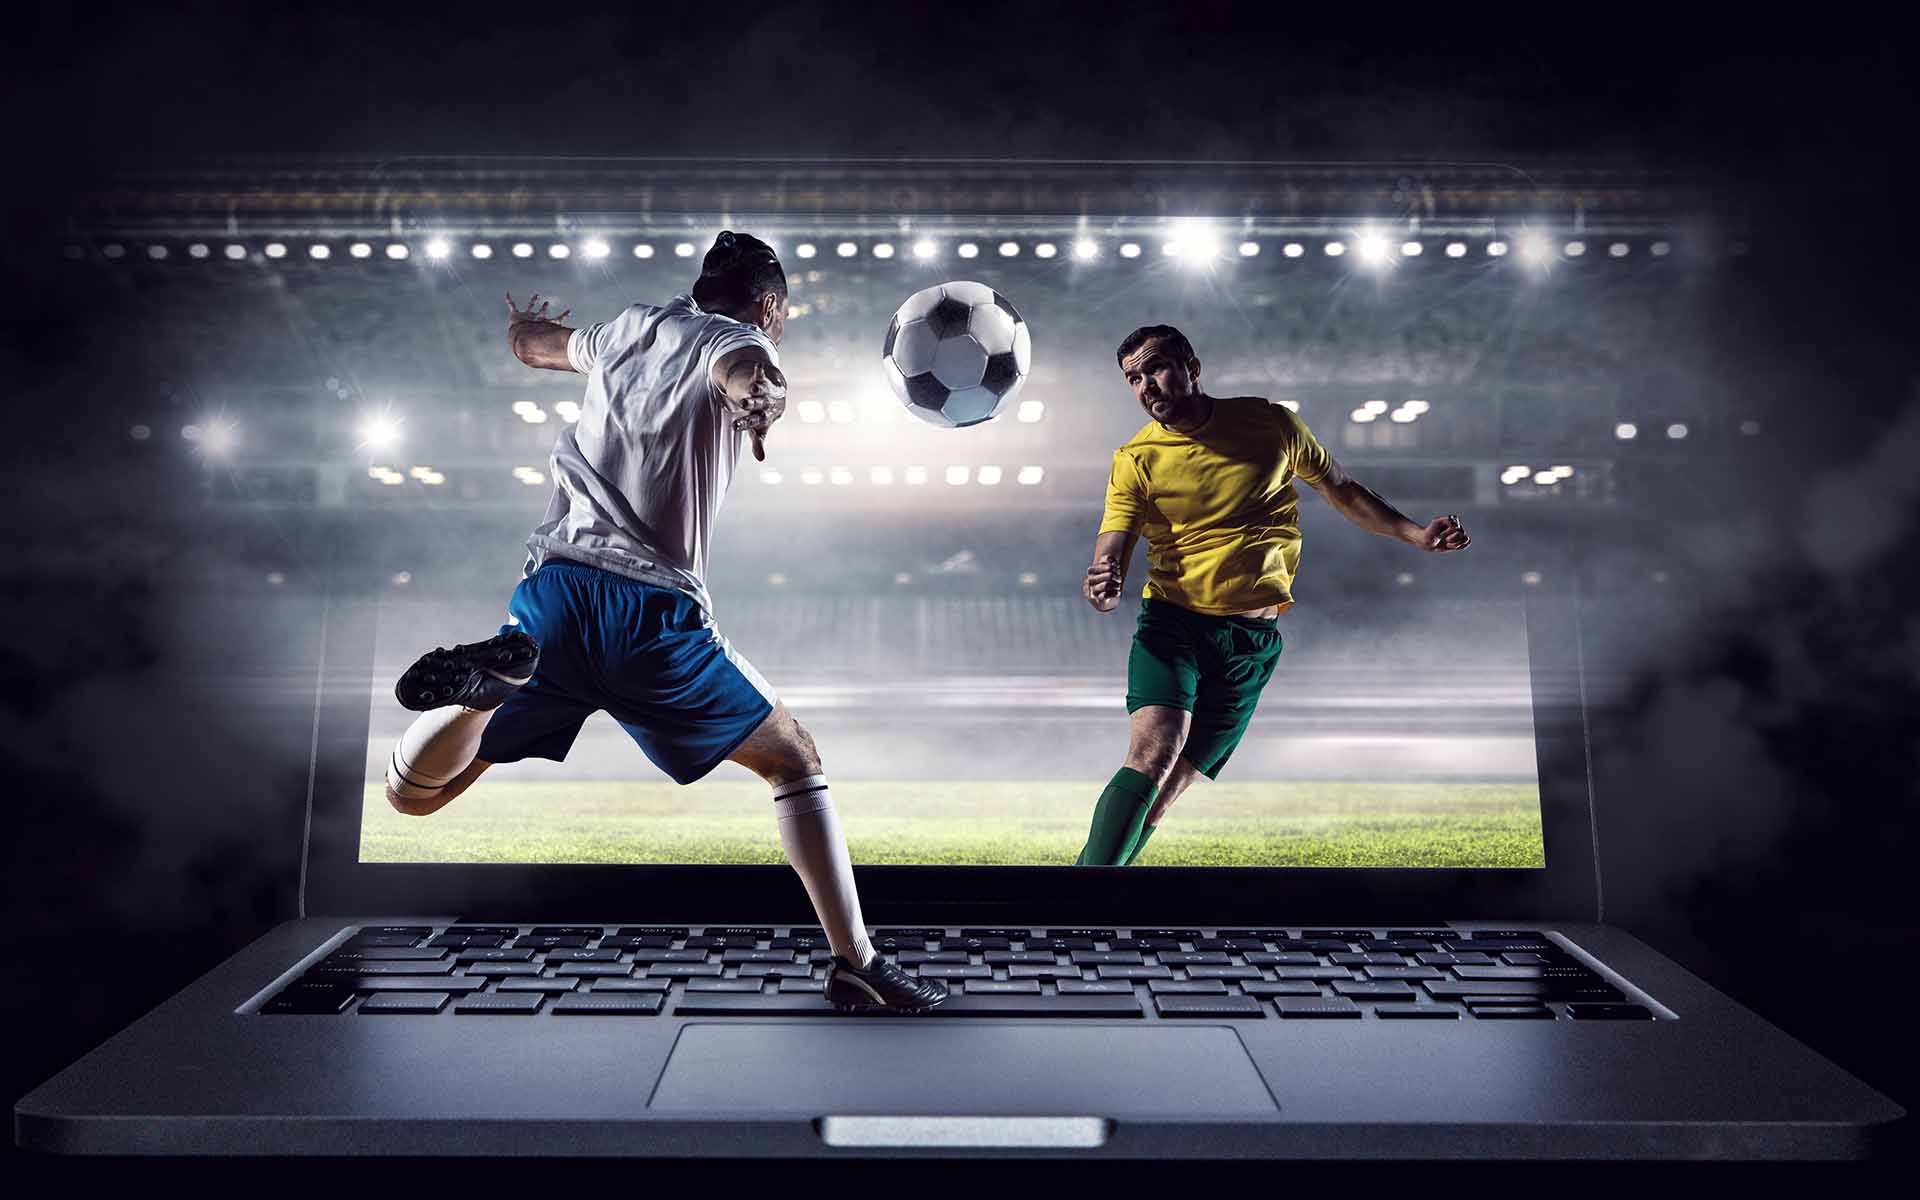 Competitive Sports: Online Betting on Any Sports Competitions